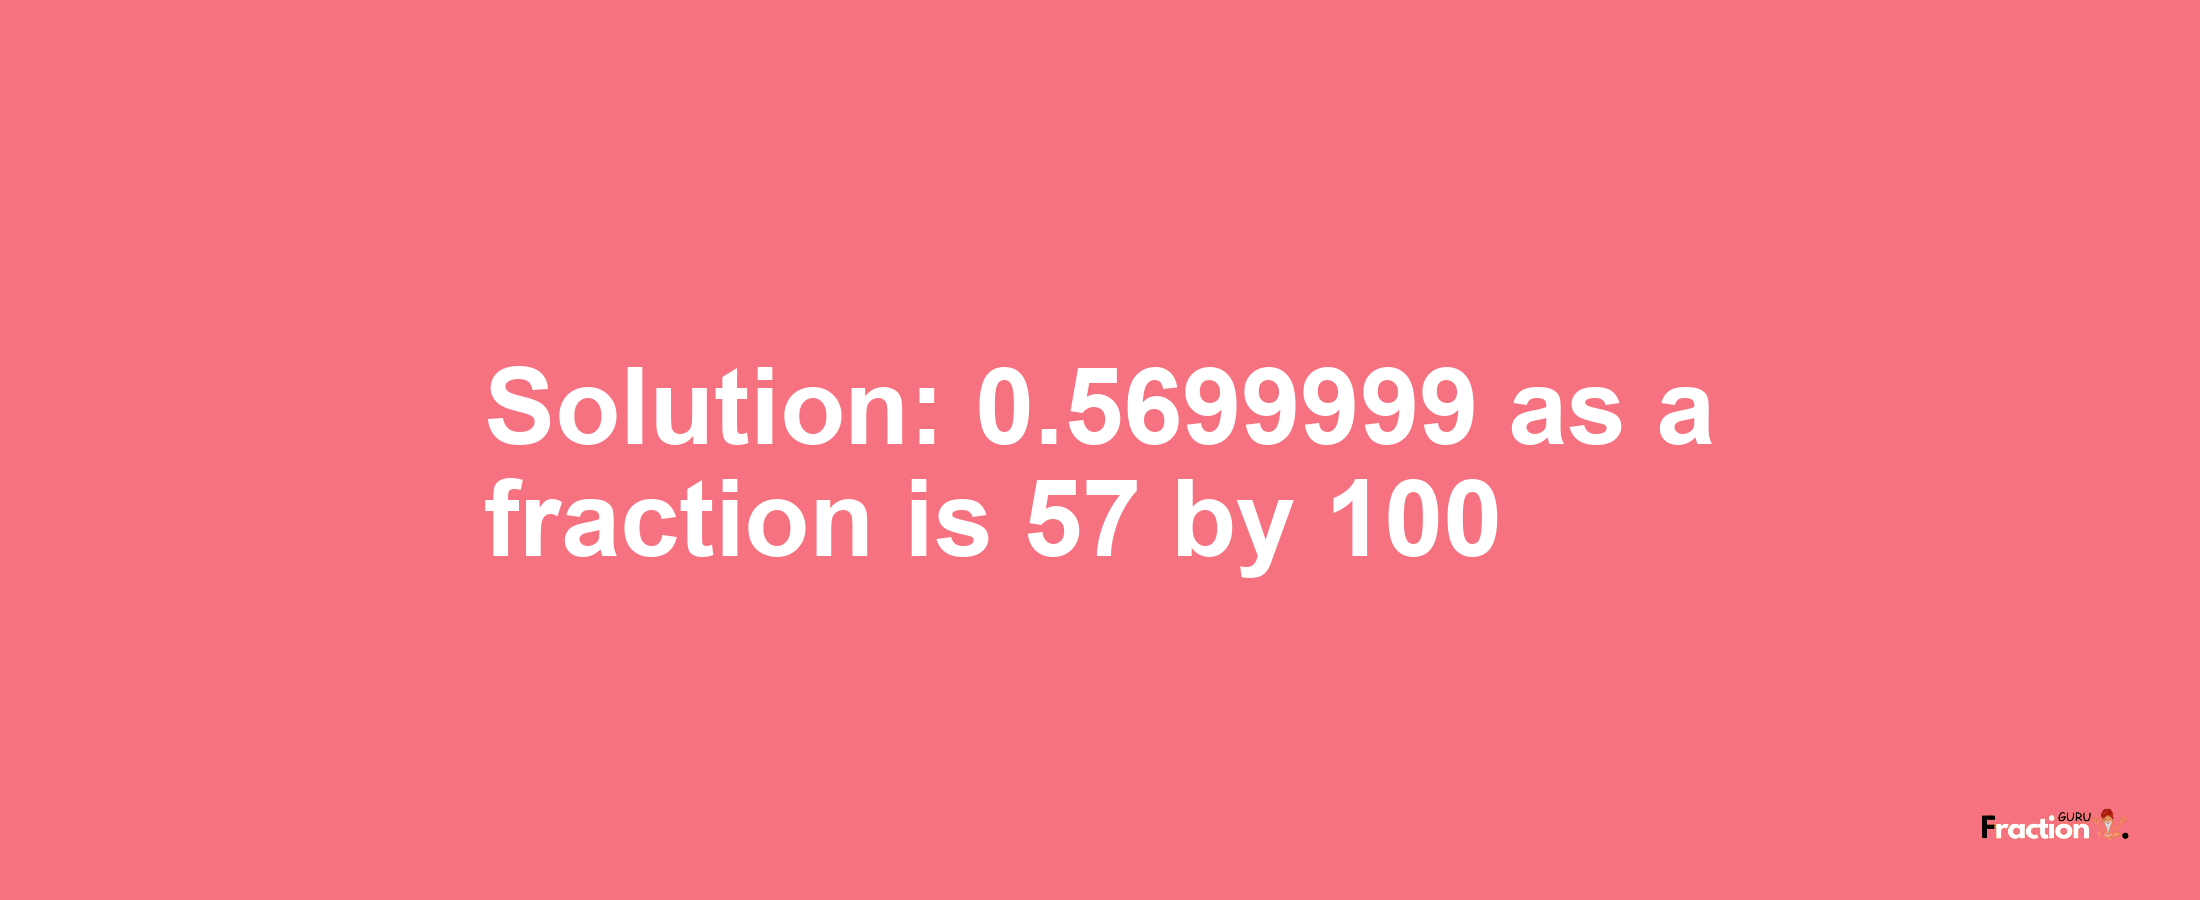 Solution:0.5699999 as a fraction is 57/100